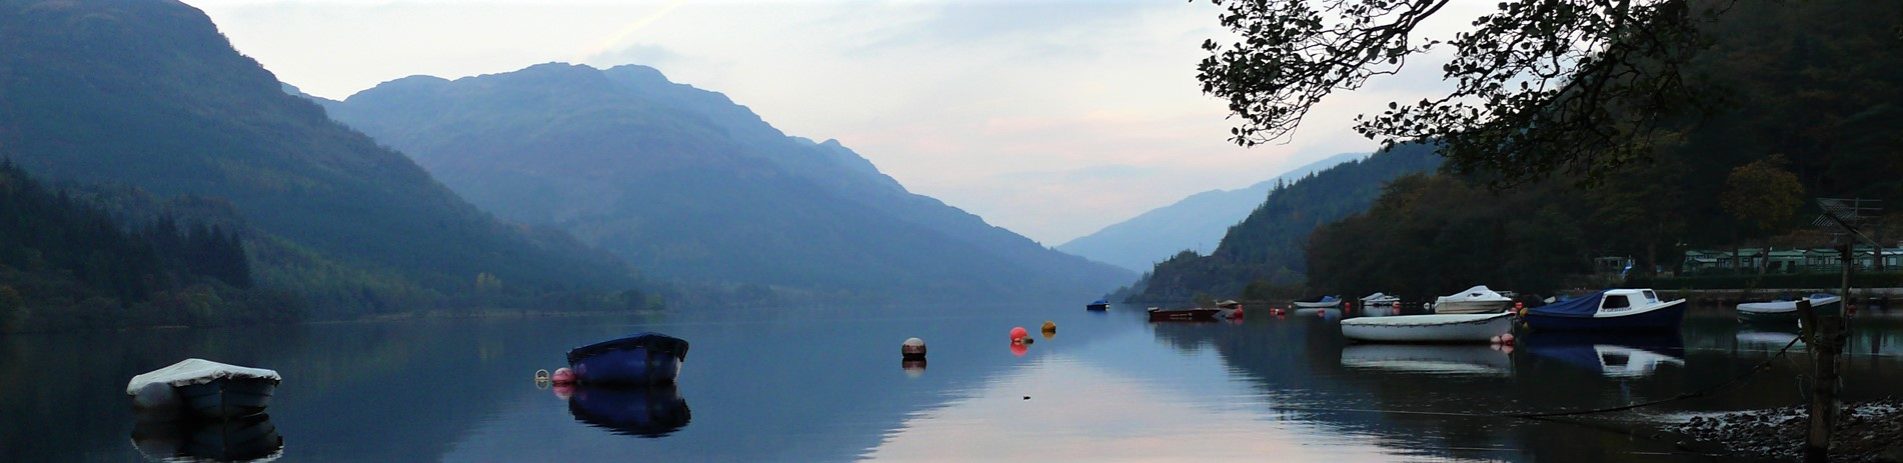 loch-eck-with-moored-boats-and-hills-on-the-left